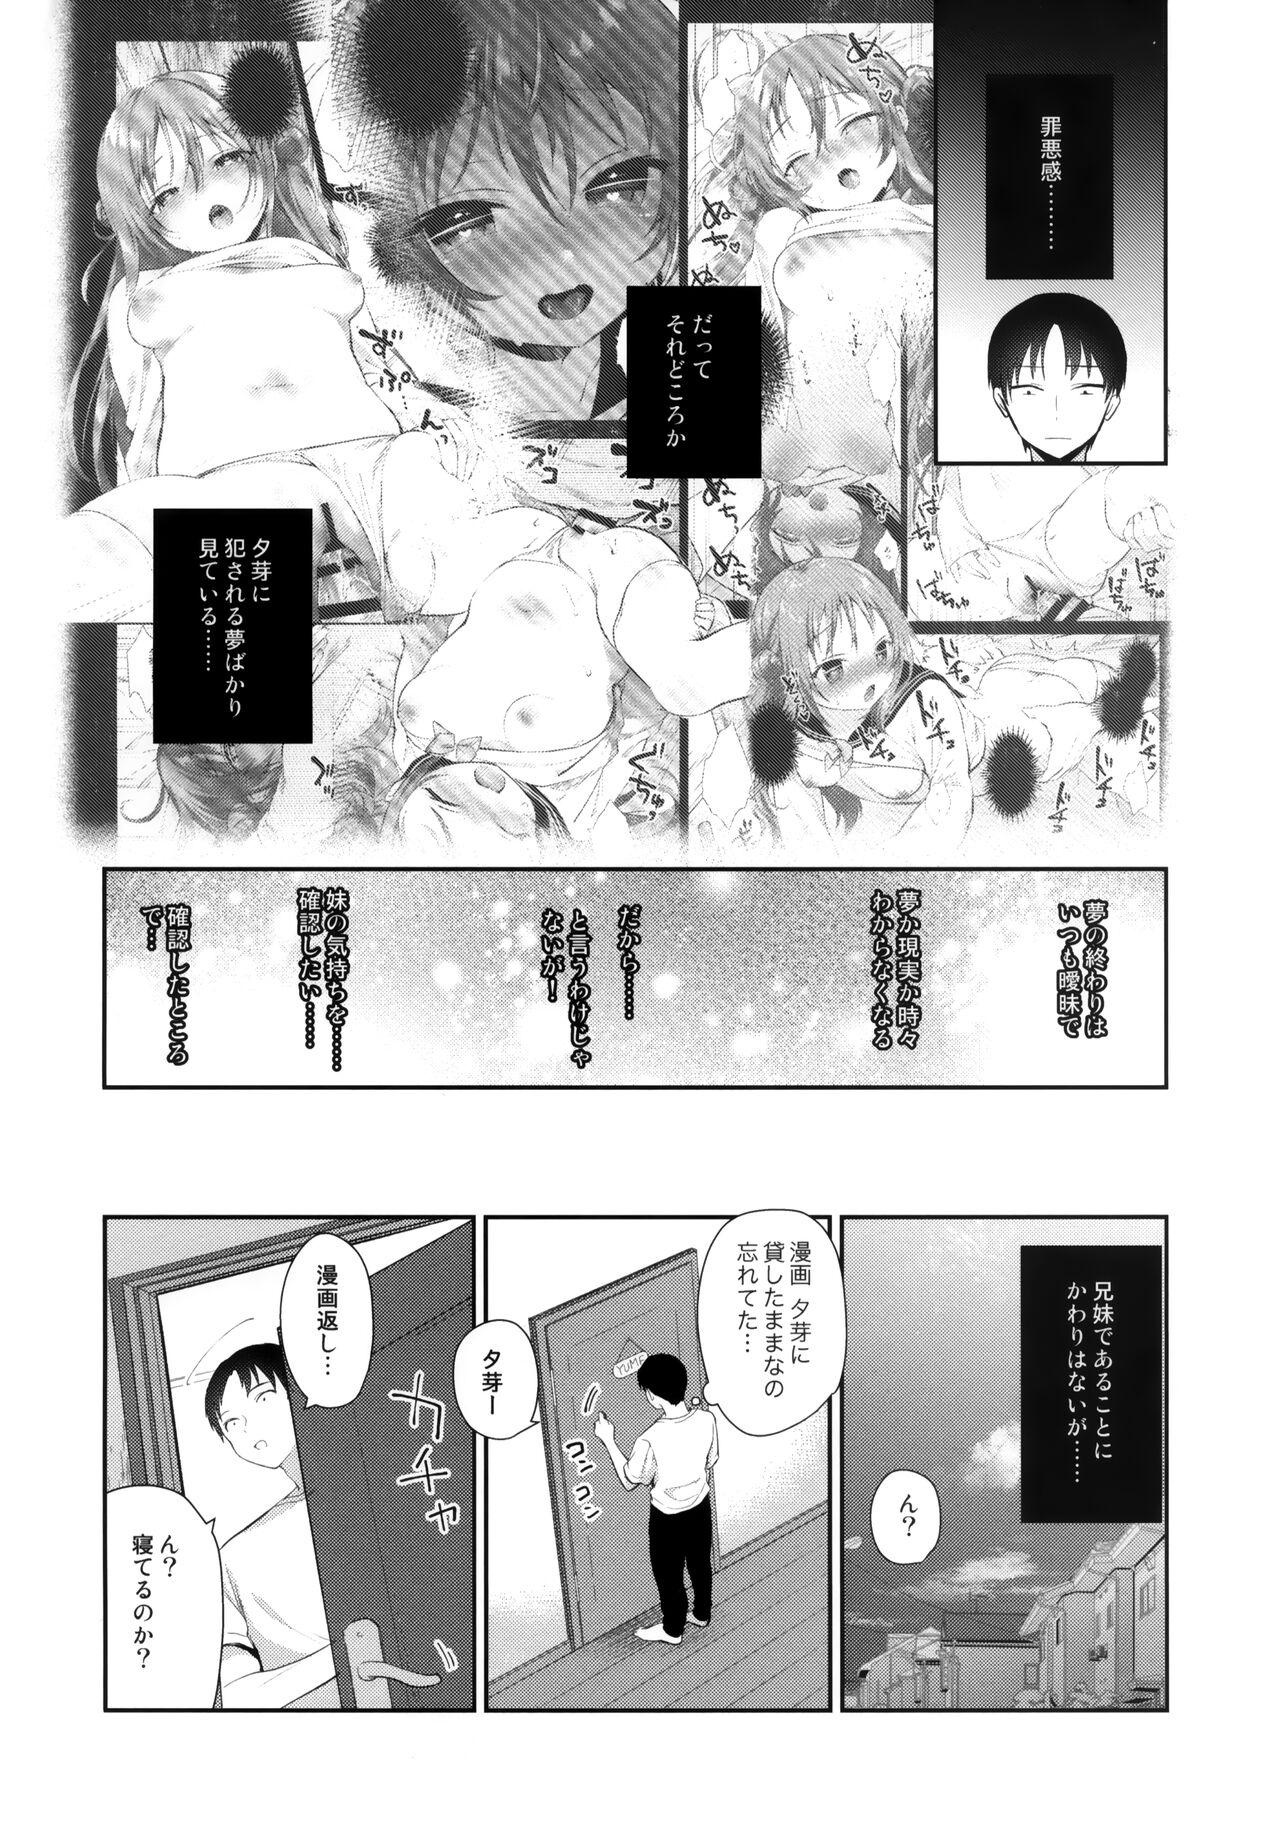 Perfect Butt Oyasumi, Onii-chan - Original Dick - Page 7